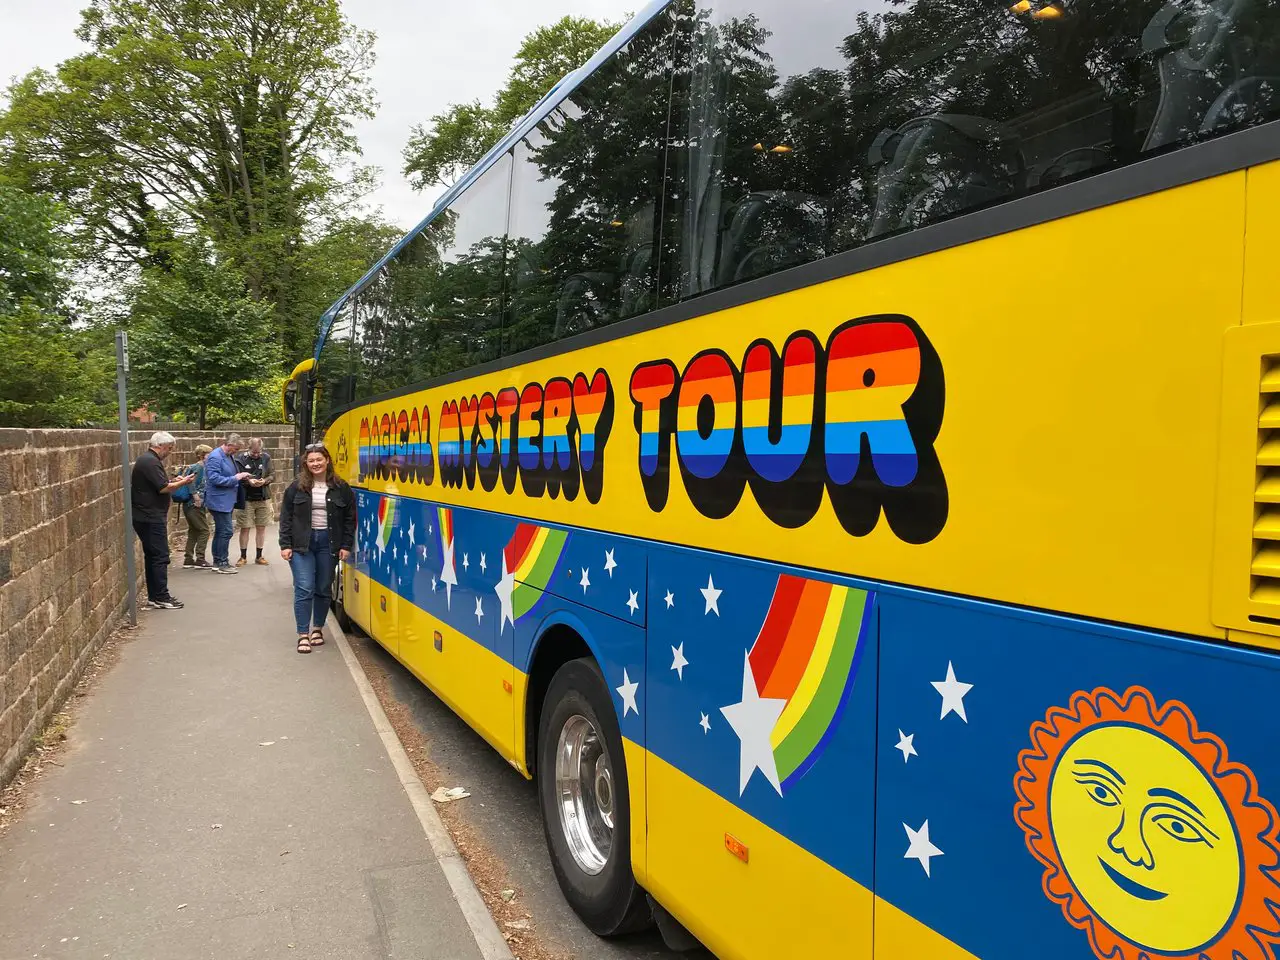 Ella with the yellow and blue Magical Mystery Tour bus in Liverpool